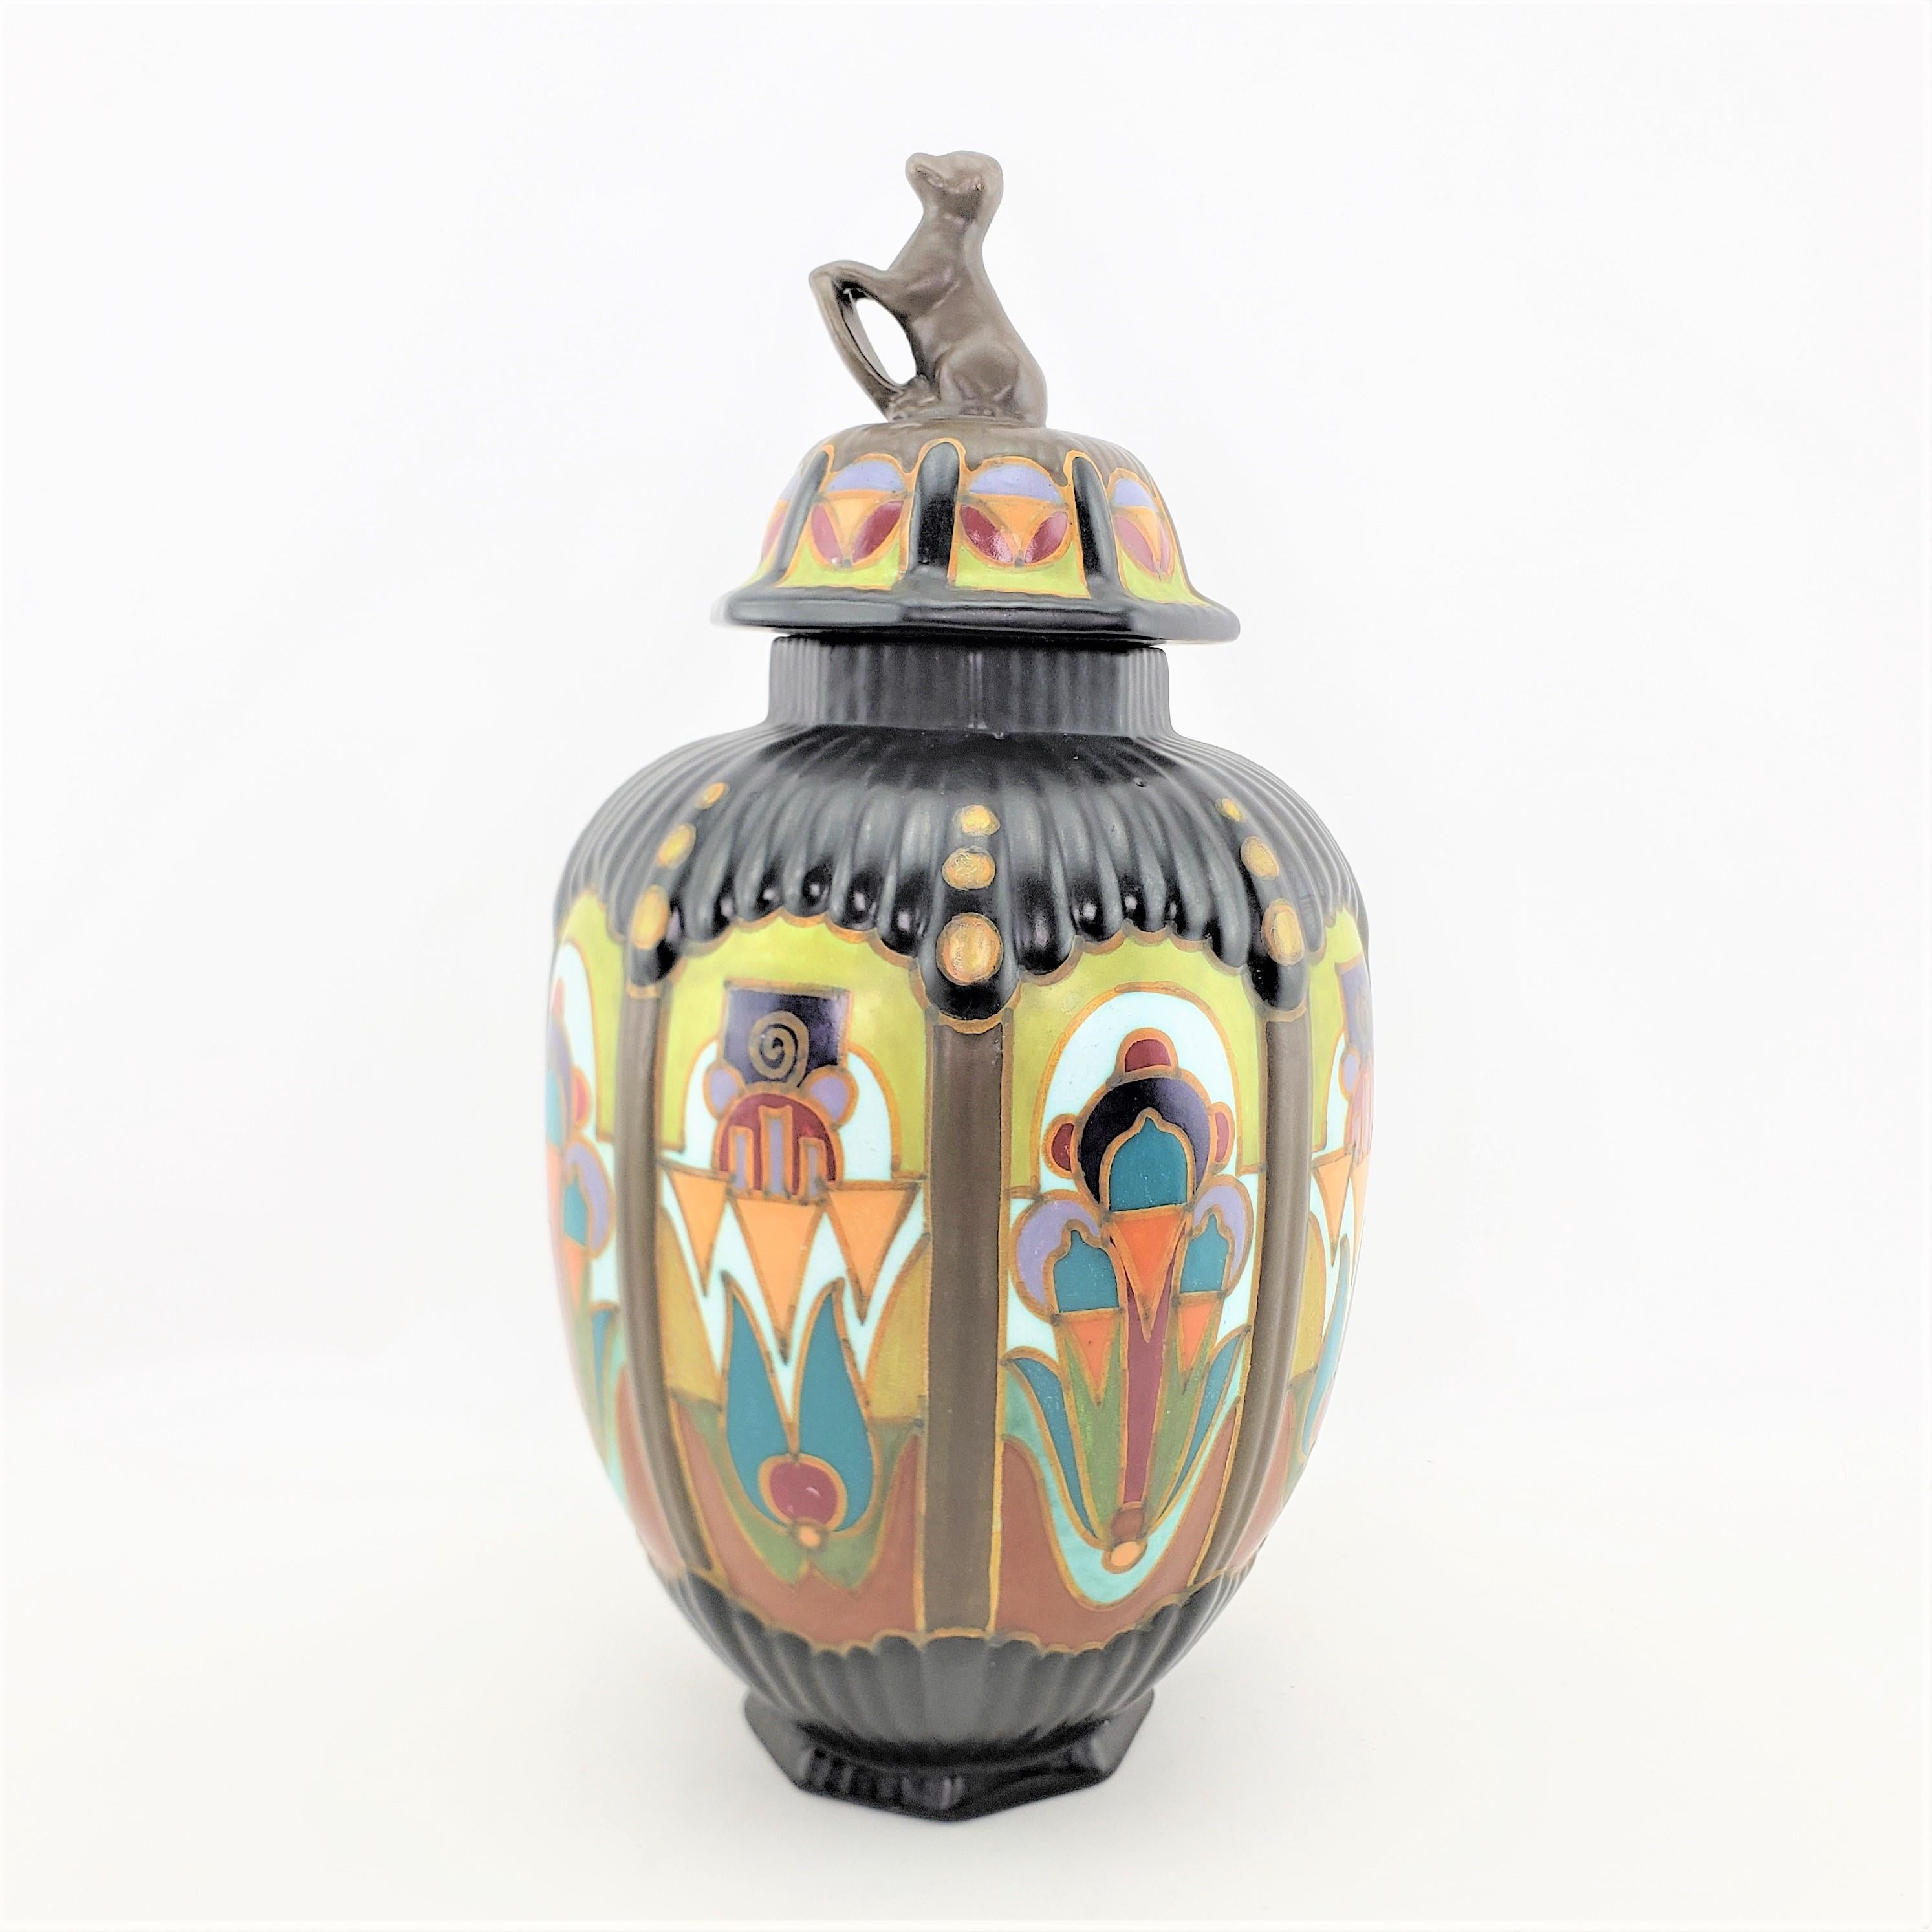 This large art pottery lidded vase or urn was made by Gouda of Holland in approximately 1920 in a period Art Deco style. The lidded vase is done with an octagonal rim and base with ribbed sides. The body of the vase is done with a black matte glaze